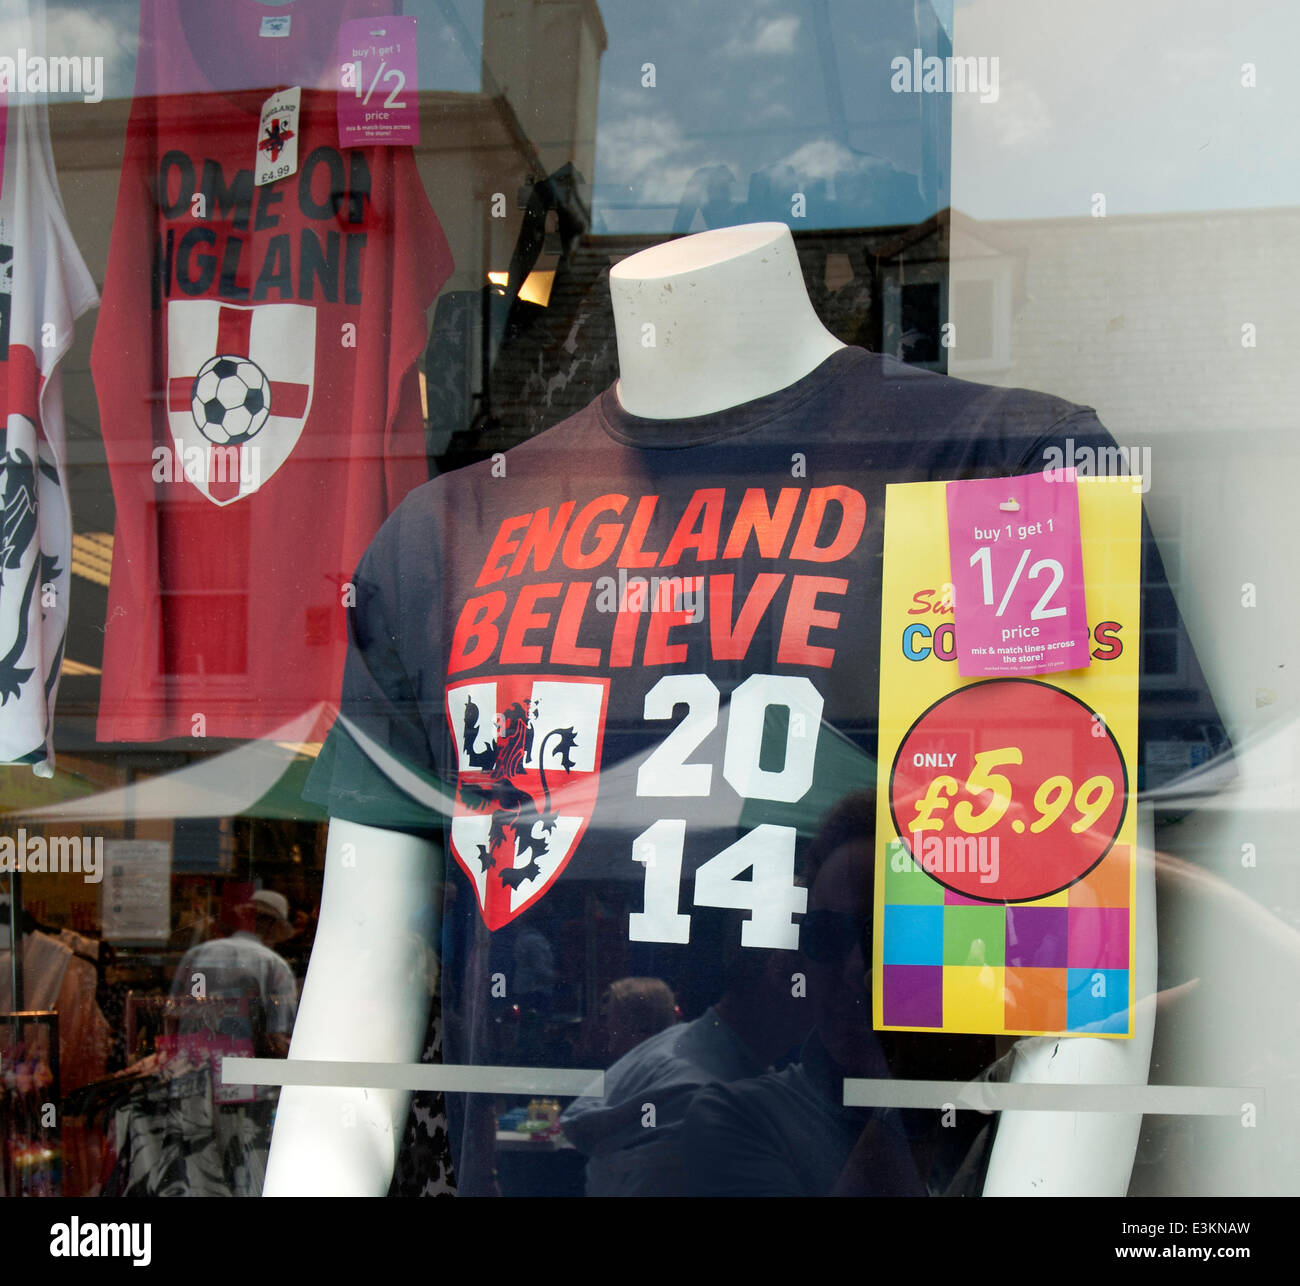 Christchurch, Dorset, UK. 23rd June 2014. An 'England Believe' 2014 supporters shirt for sale at a reduced price in a high street shop window in Christchurch, Dorset, UK on the eve of England's last game in the World Cup in Brazil after getting knocked out of the competition at the group stage for the first time in 56 years. Credit:  Rob Wilkinson/Alamy Live News Stock Photo